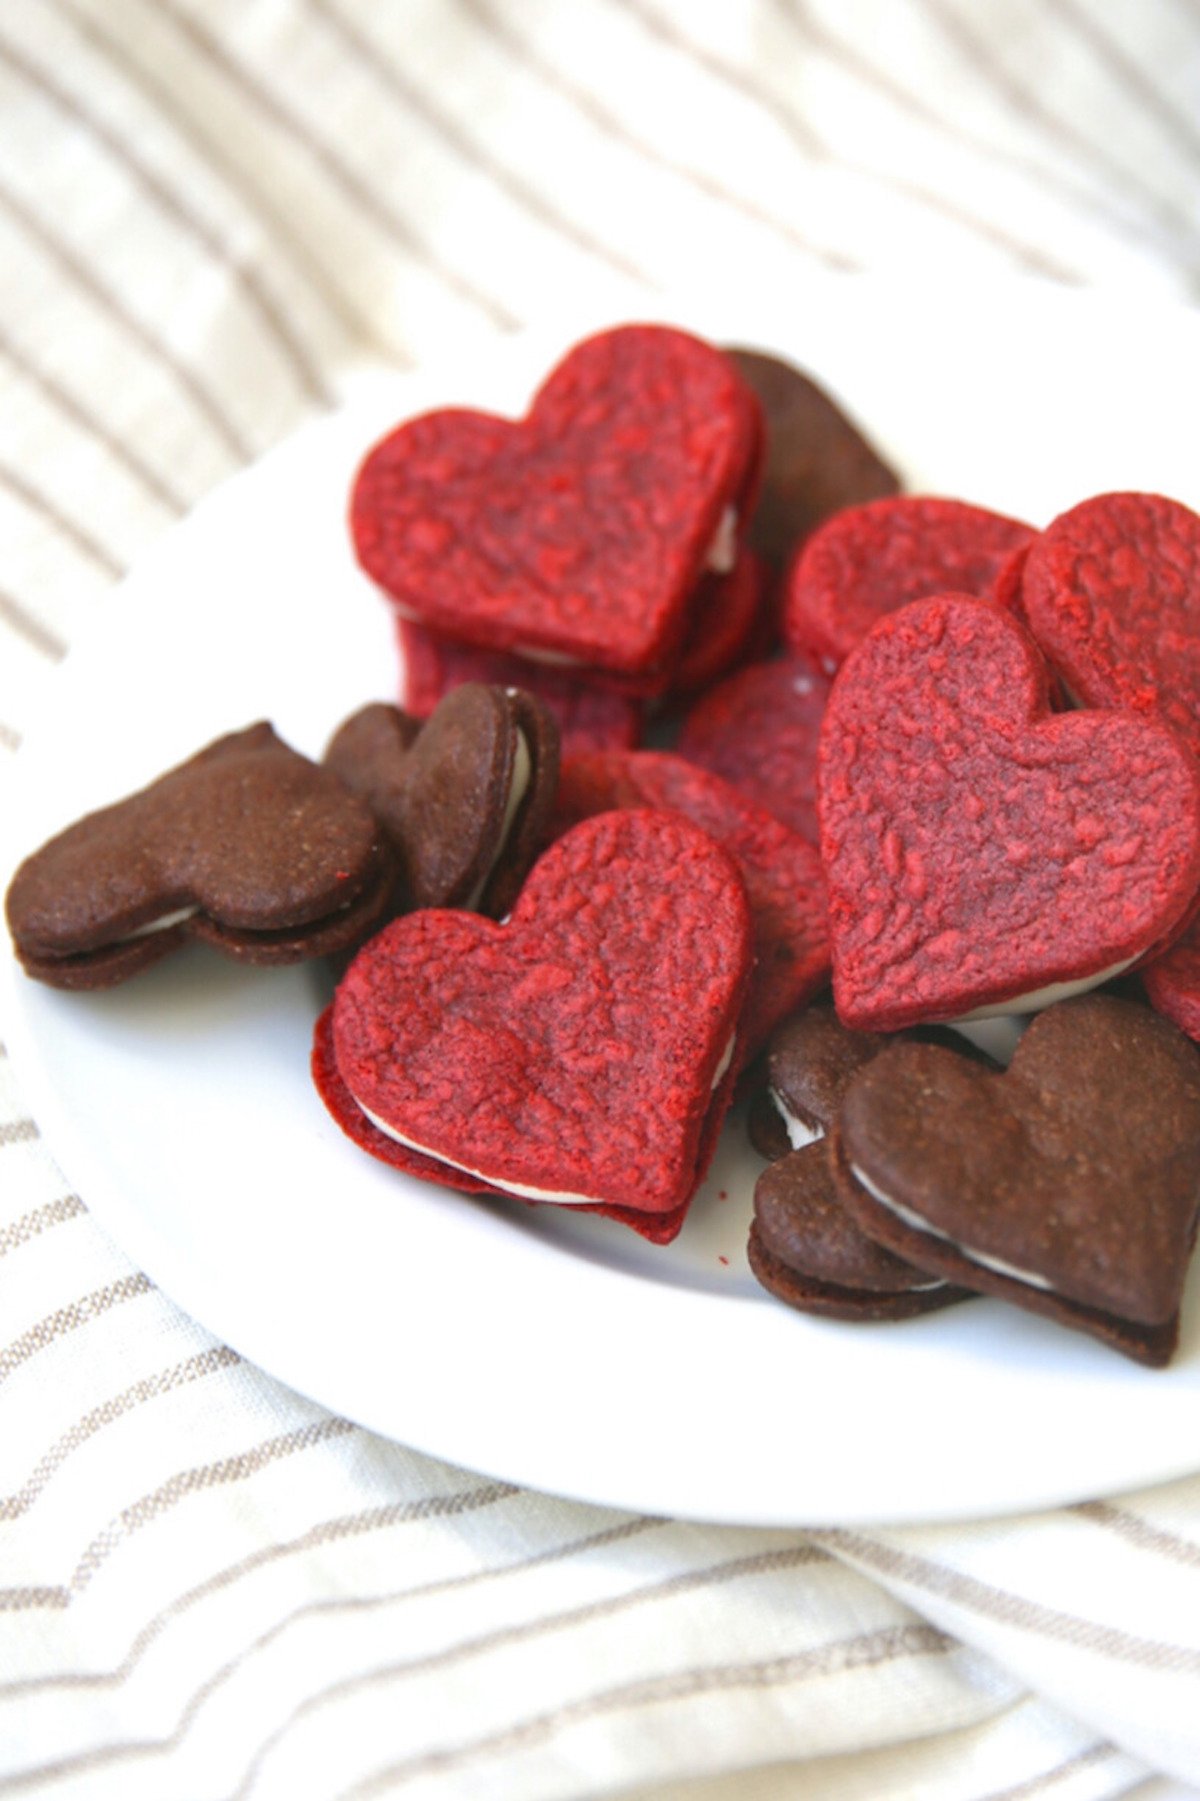 Homemade heart-shaped cookies resembling oreos are beautifully arranged on a plate.